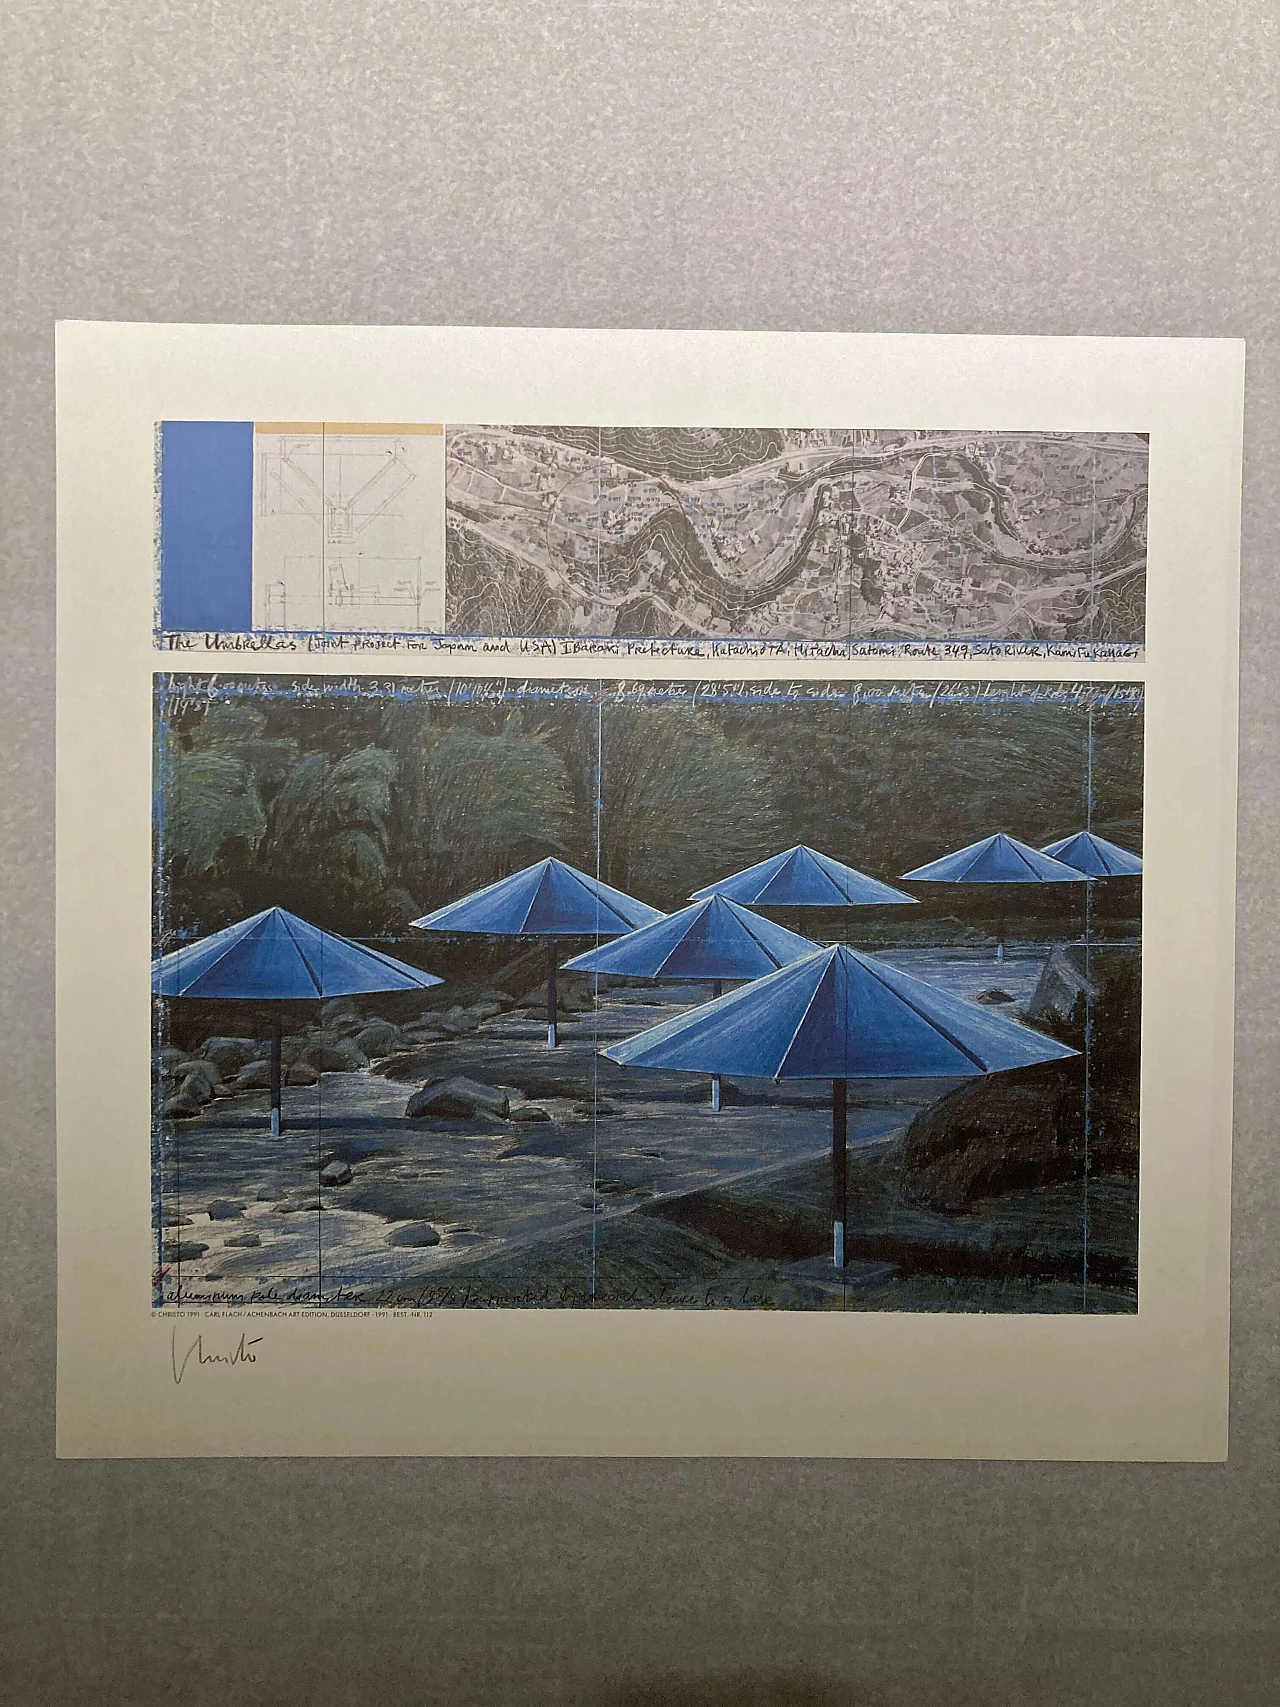 Christo, The Umbrellas - Joint Project for Japan and USA, lithograph, 1991 4